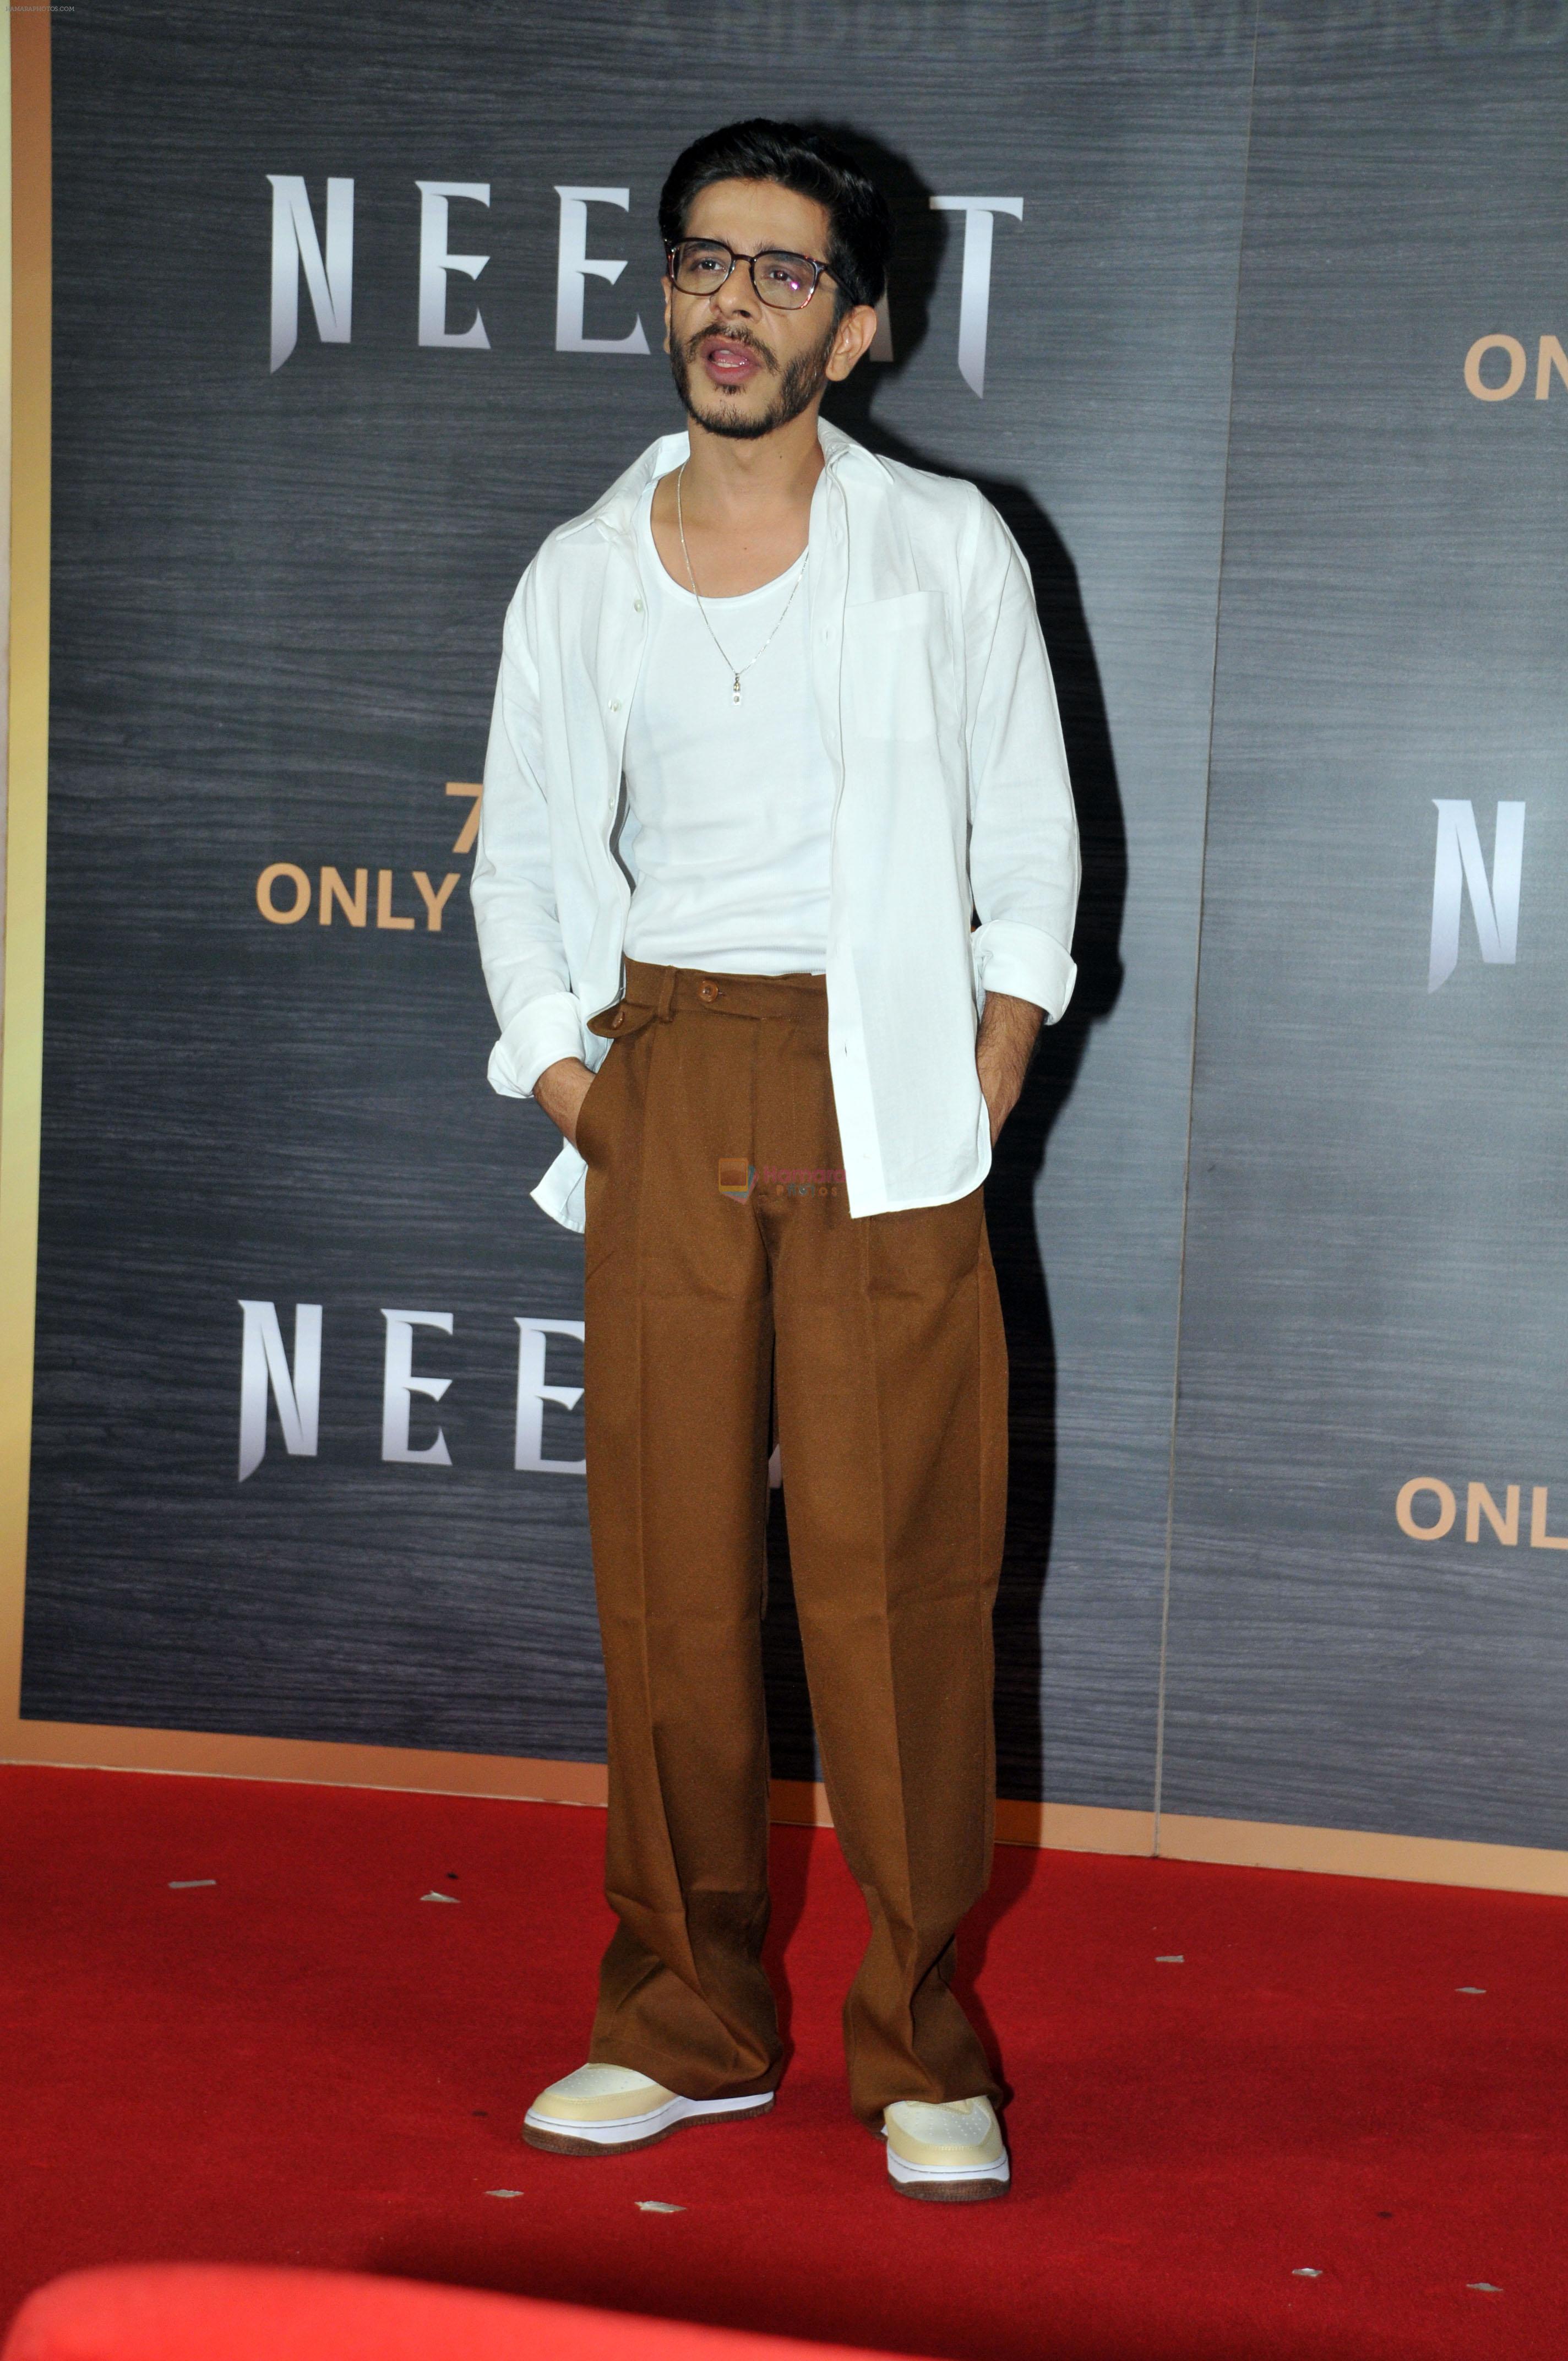 Shashank Arora at the Press Conference of film Neeyat on 5 July 2023